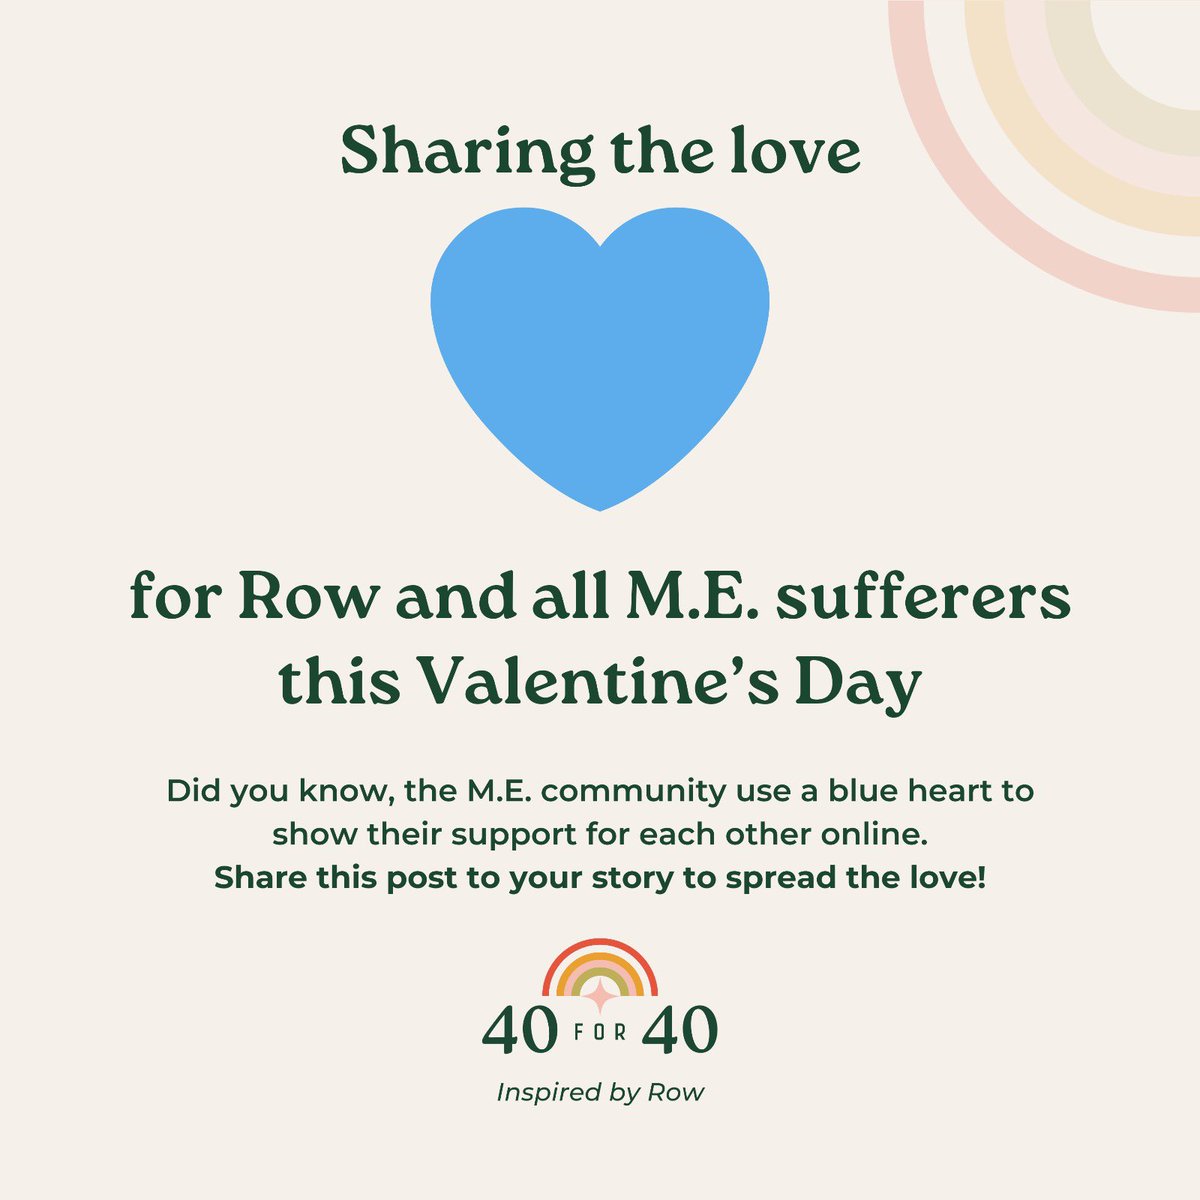 Sharing the love this Valentine’s Day for Row and all people with #MECFS. This brutal condition is lonely and isolating, but check out @40for40campaign on Instagram to see the love and support there is out there 
#valentinesday 
#40for40